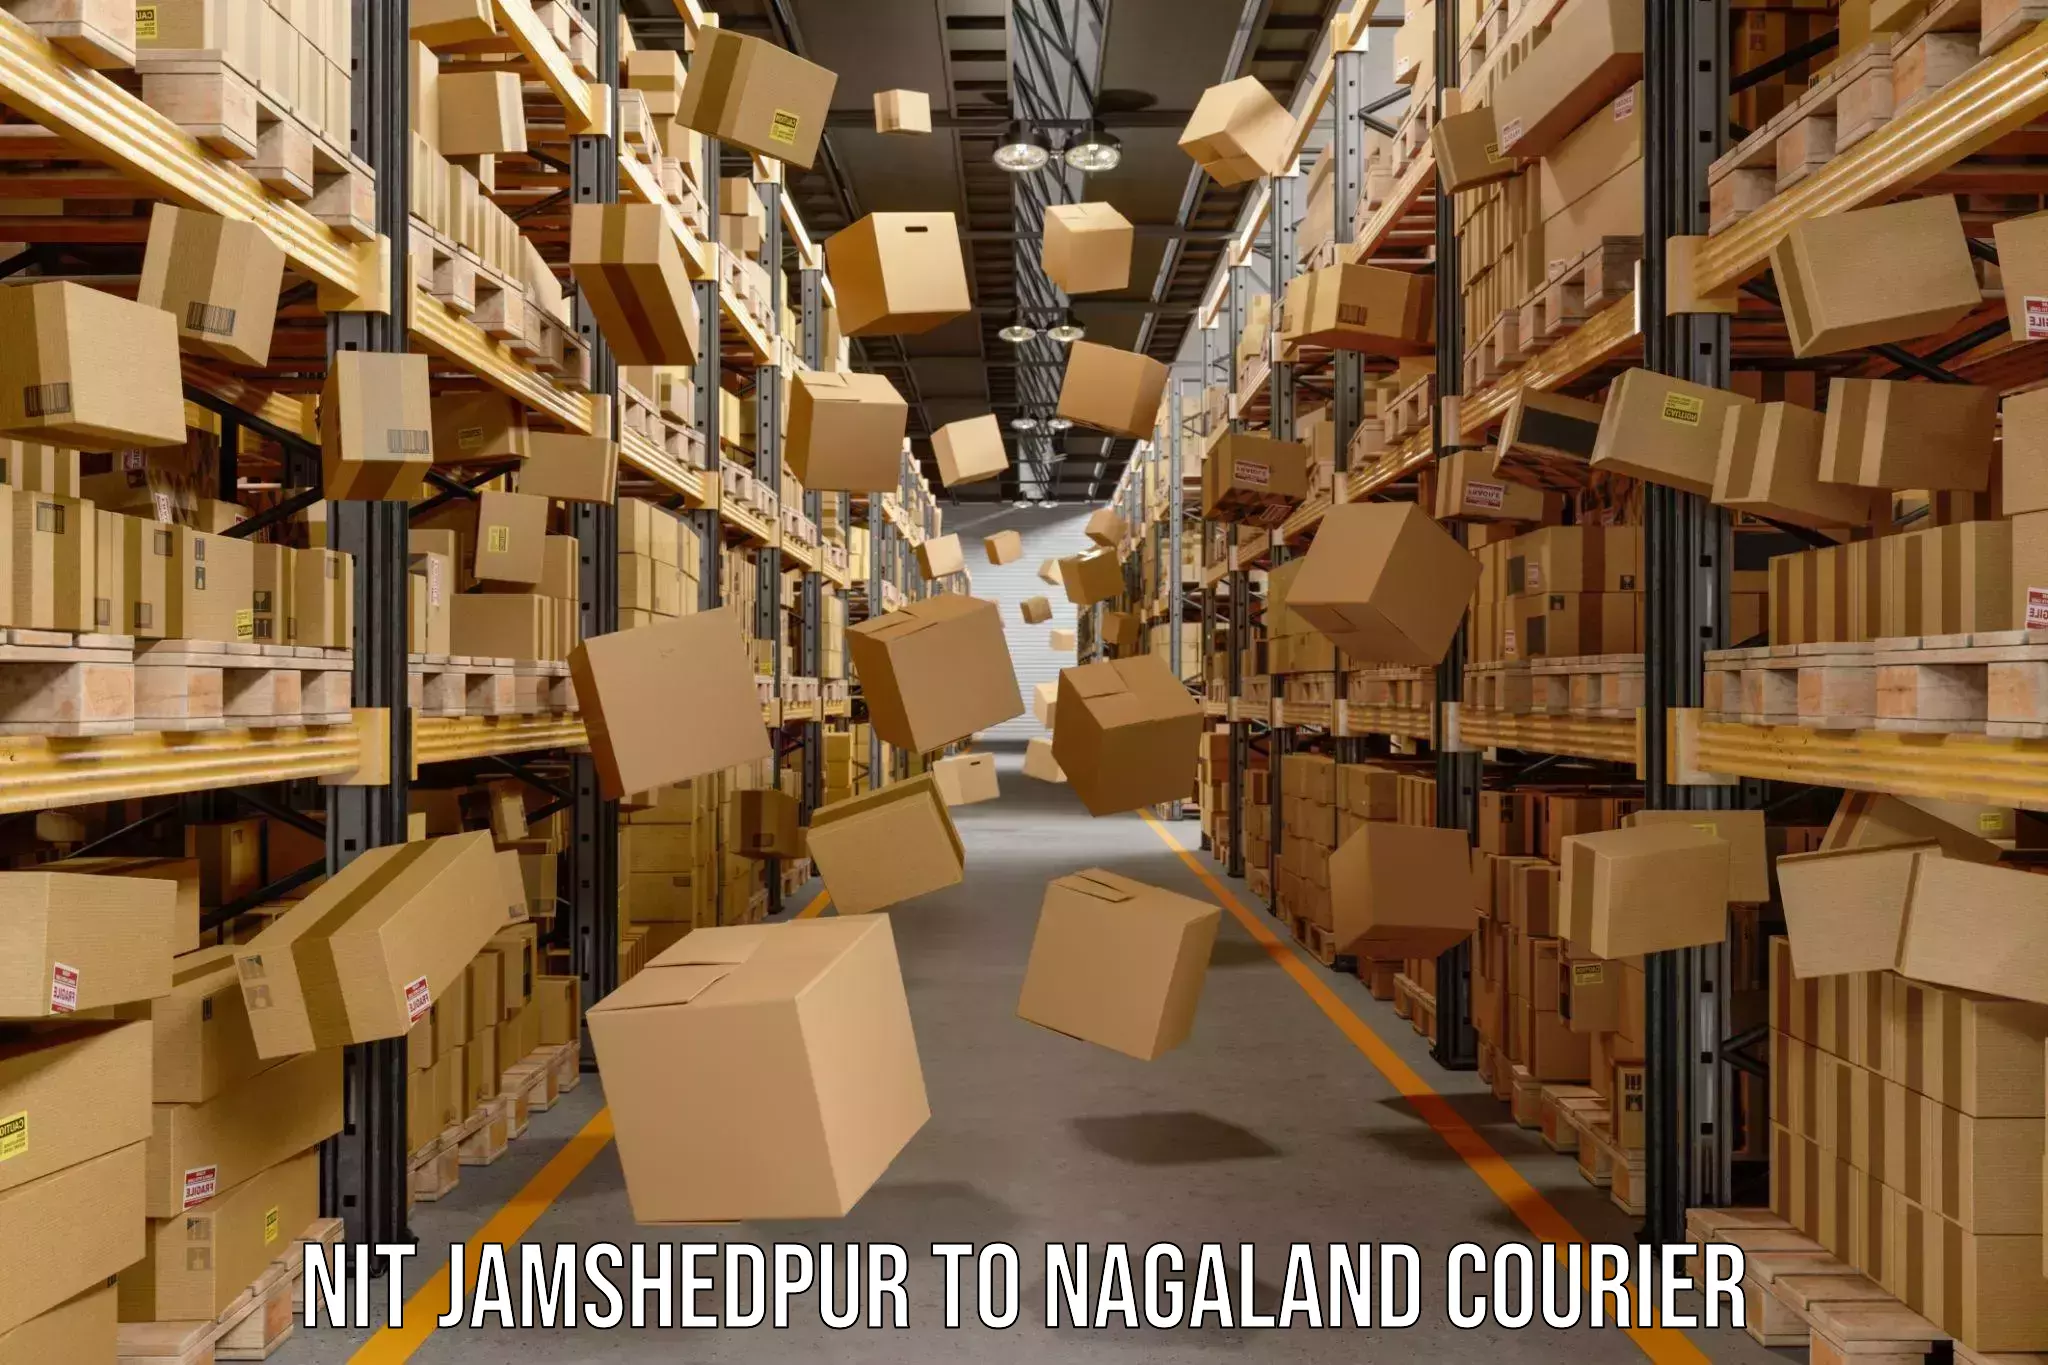 24-hour courier services NIT Jamshedpur to Nagaland